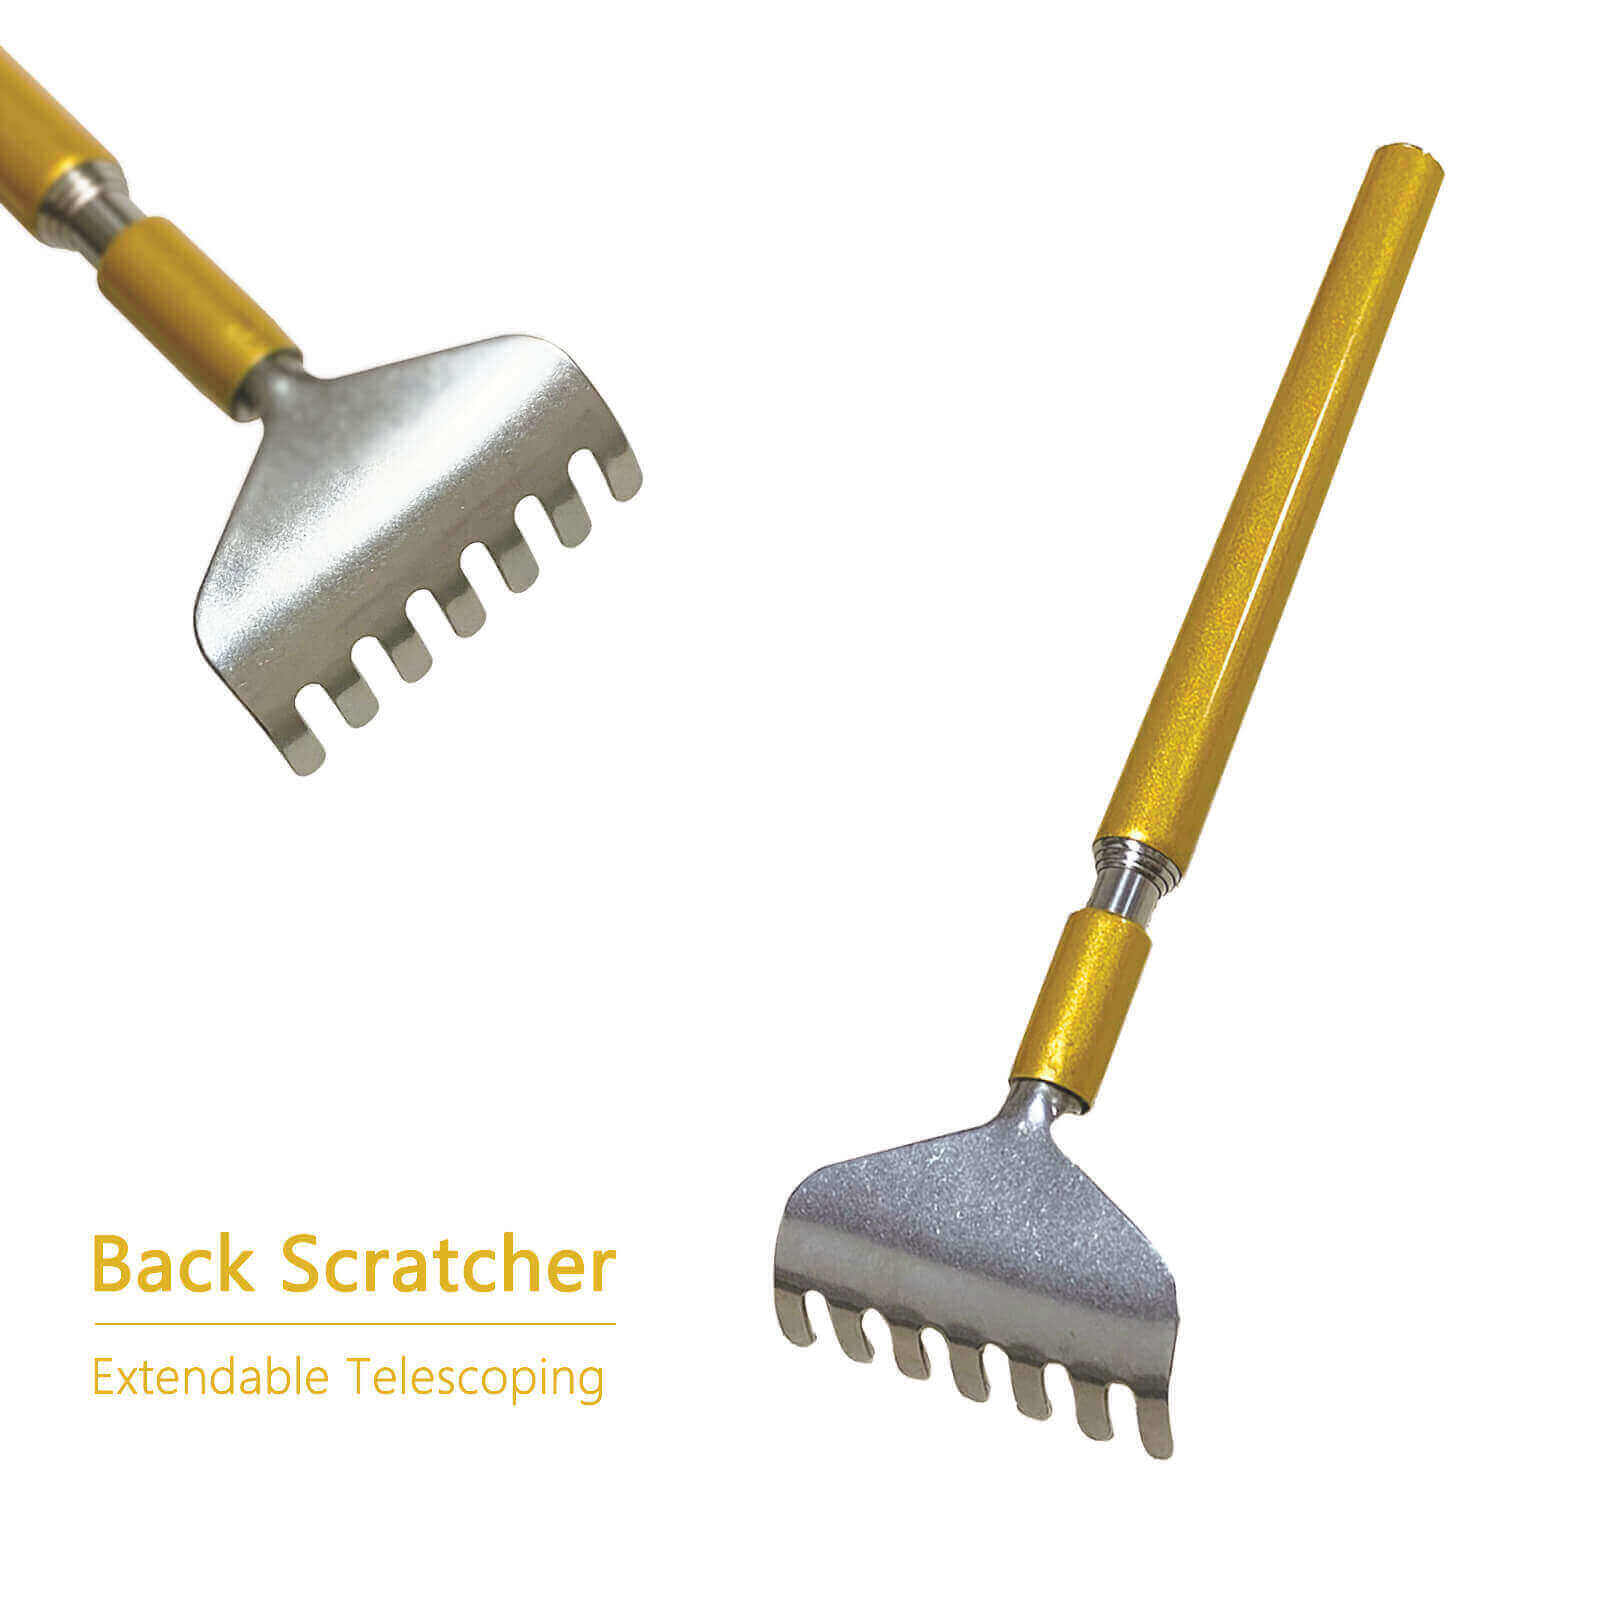 Extendable Back Scratcher with Built-in Ear Wax Remover, telescoping handle of the item